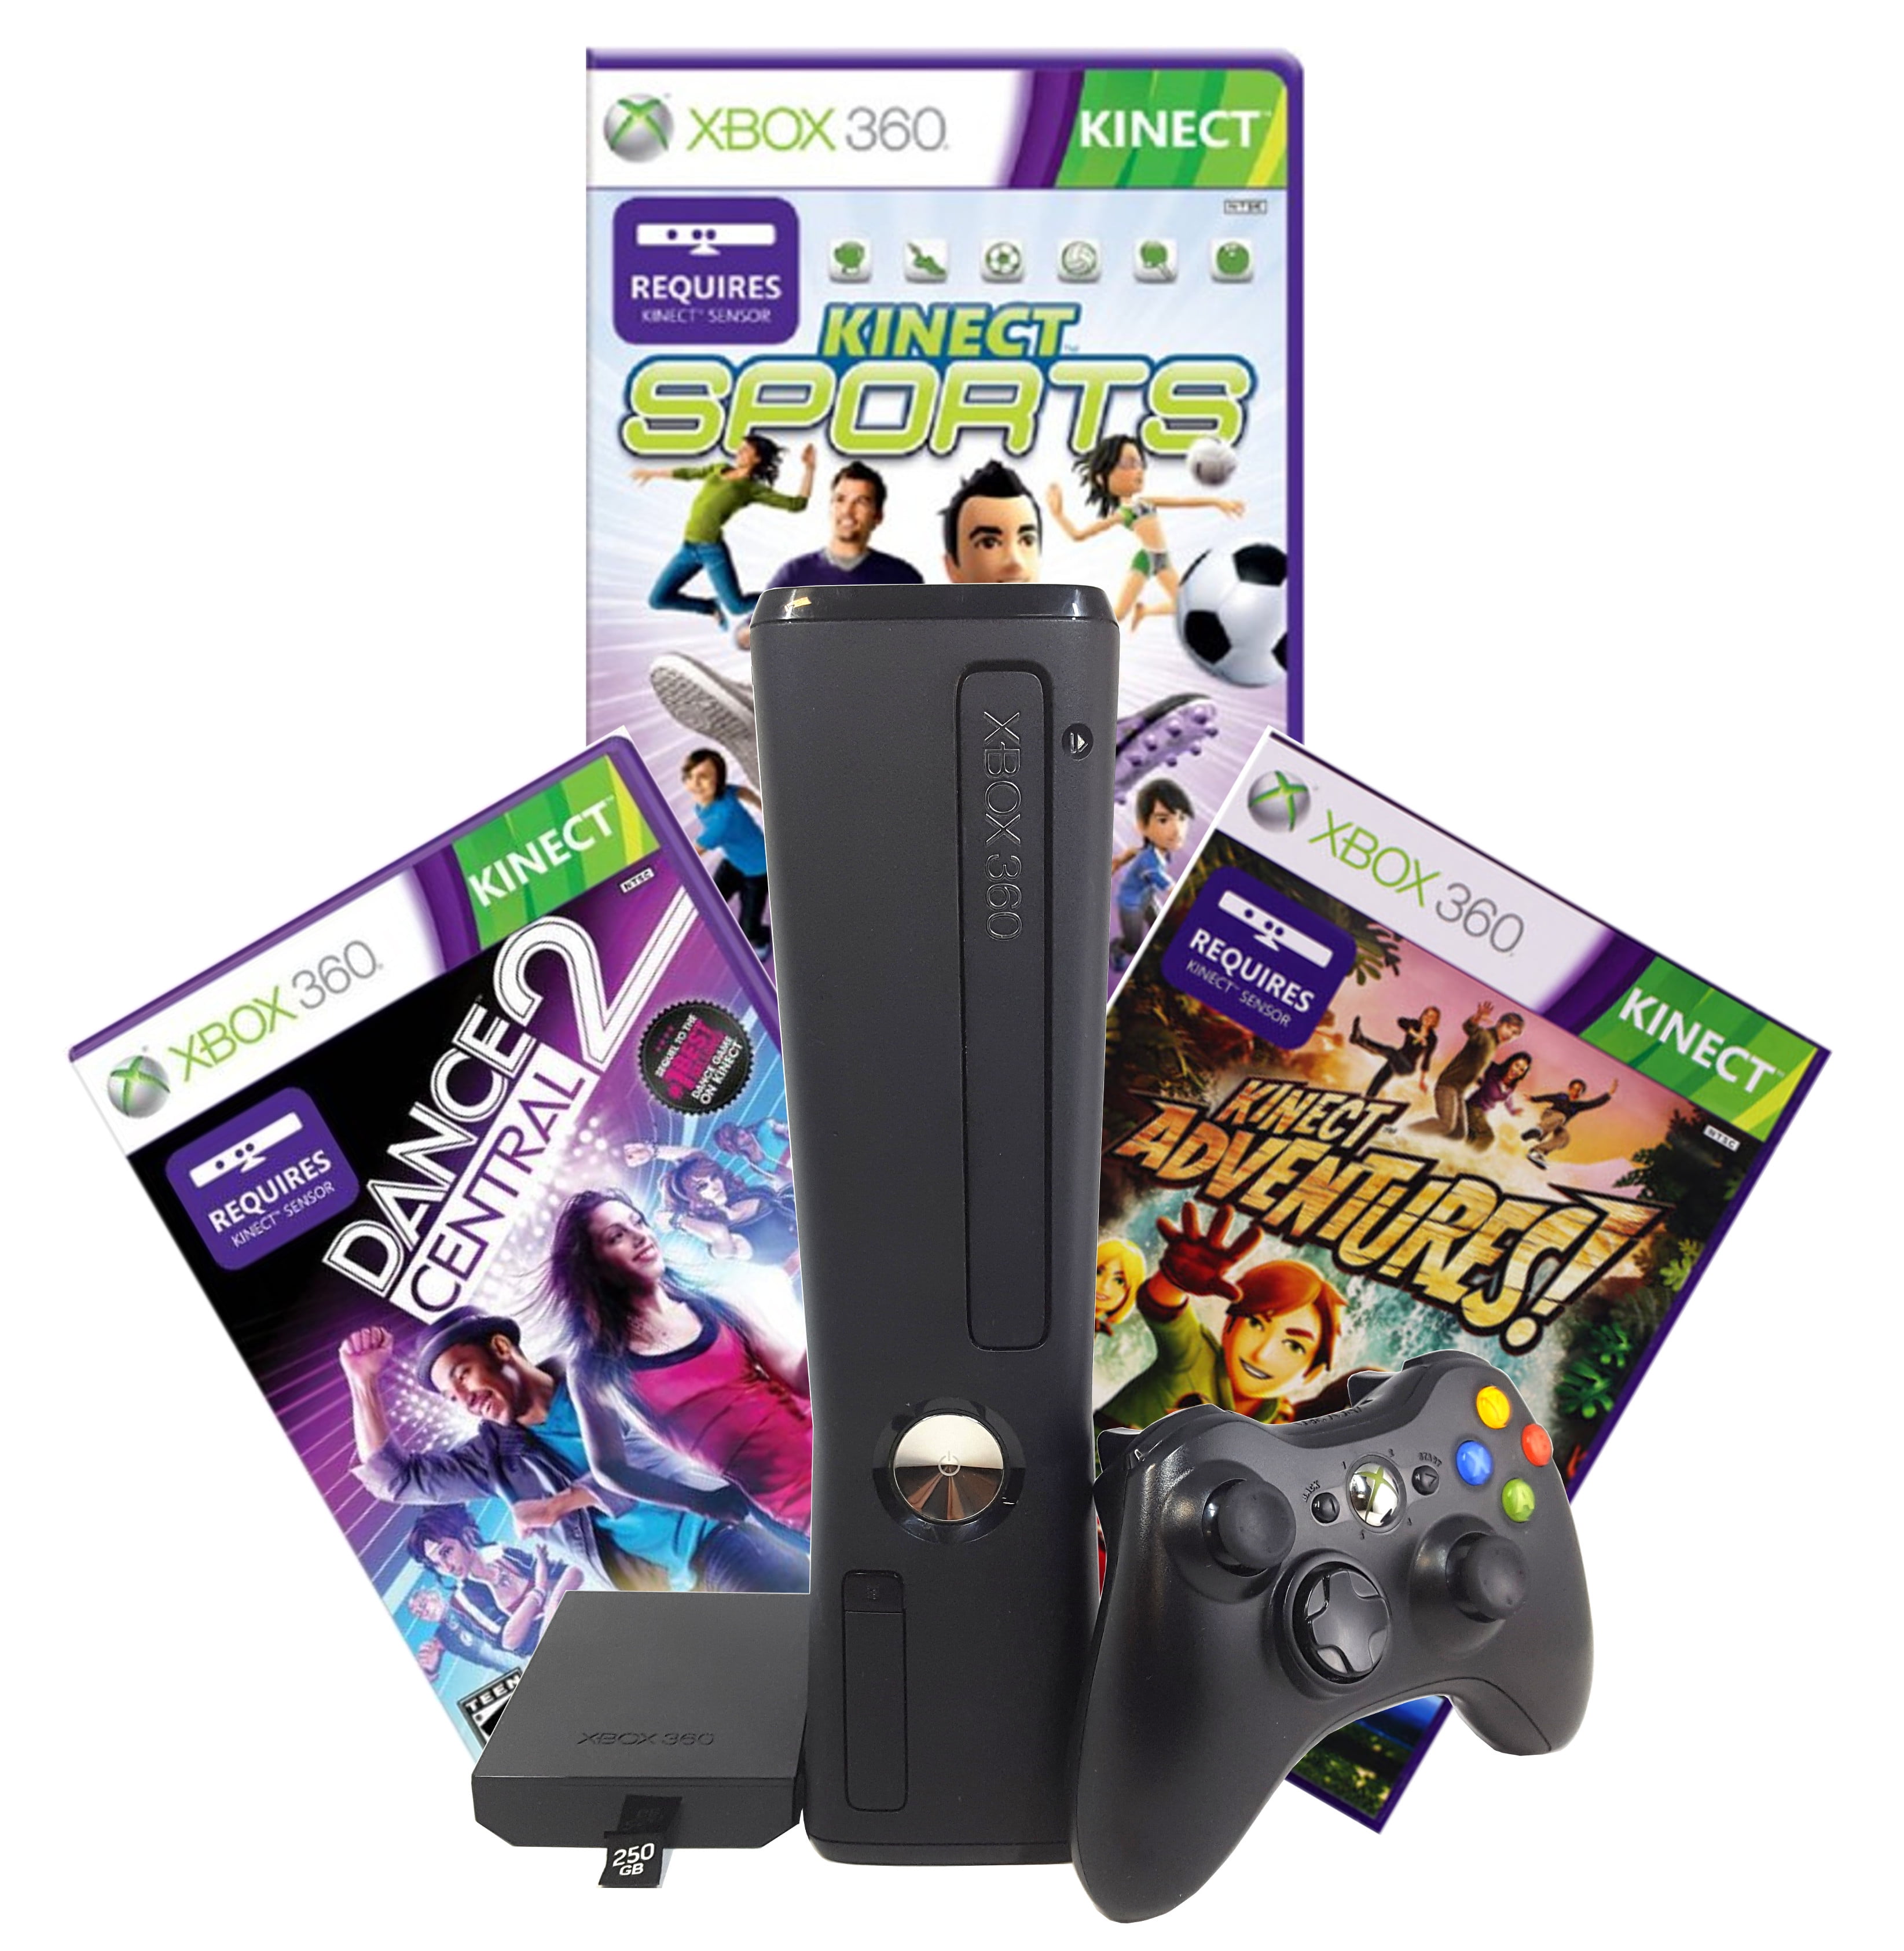 Restored Xbox 360 250GB Console, Kinect Sensor, games Sports, Adventures,  Dance Central 2 (Refurbished) 